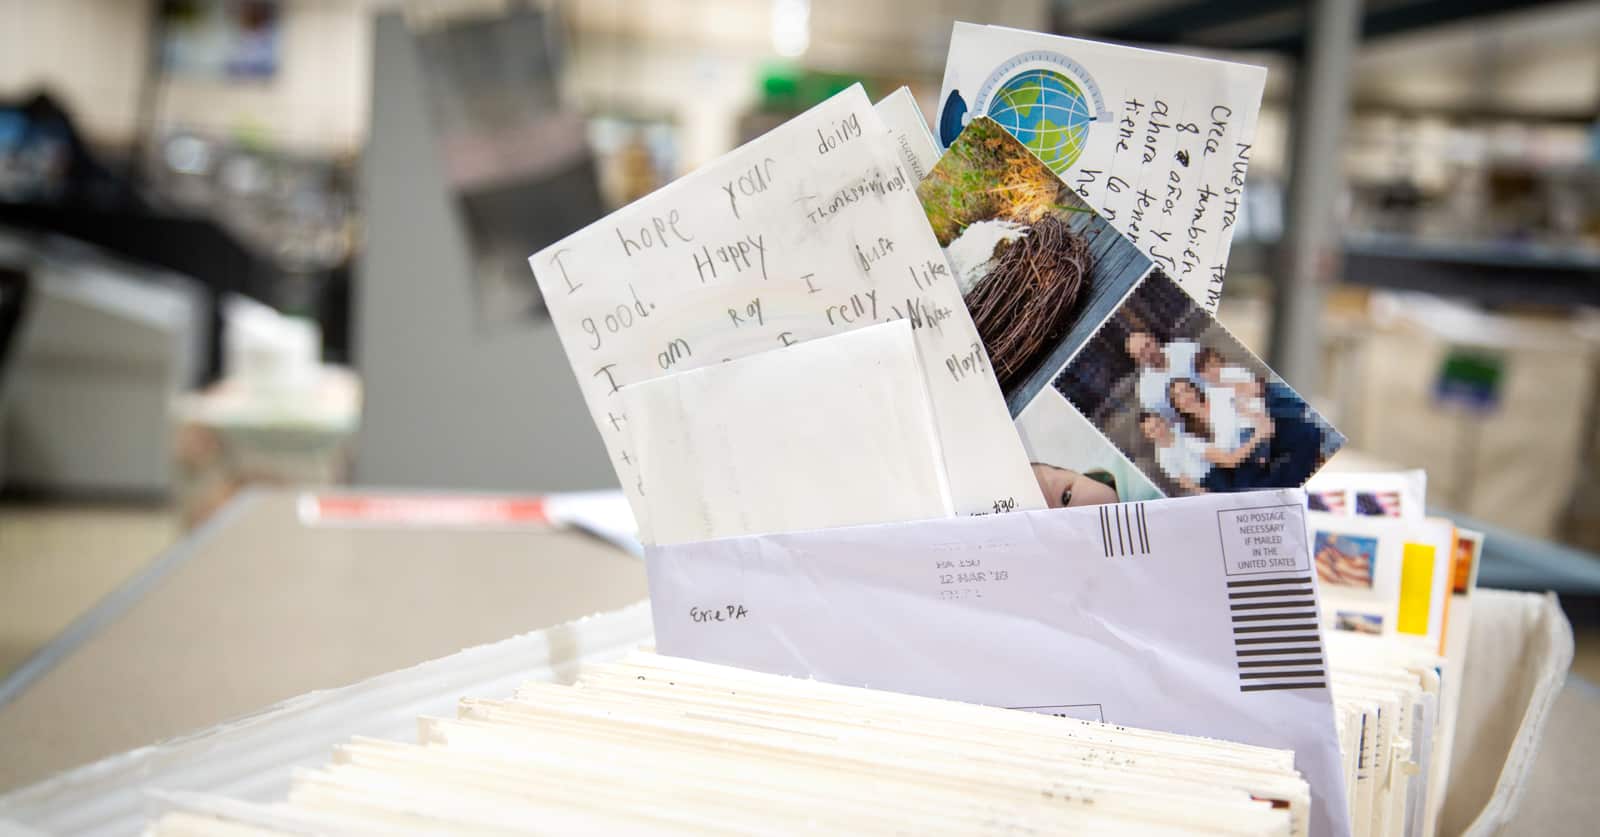 How Long Does It Take for My Letters to Be Delivered? A file folder full of letters and pictures.